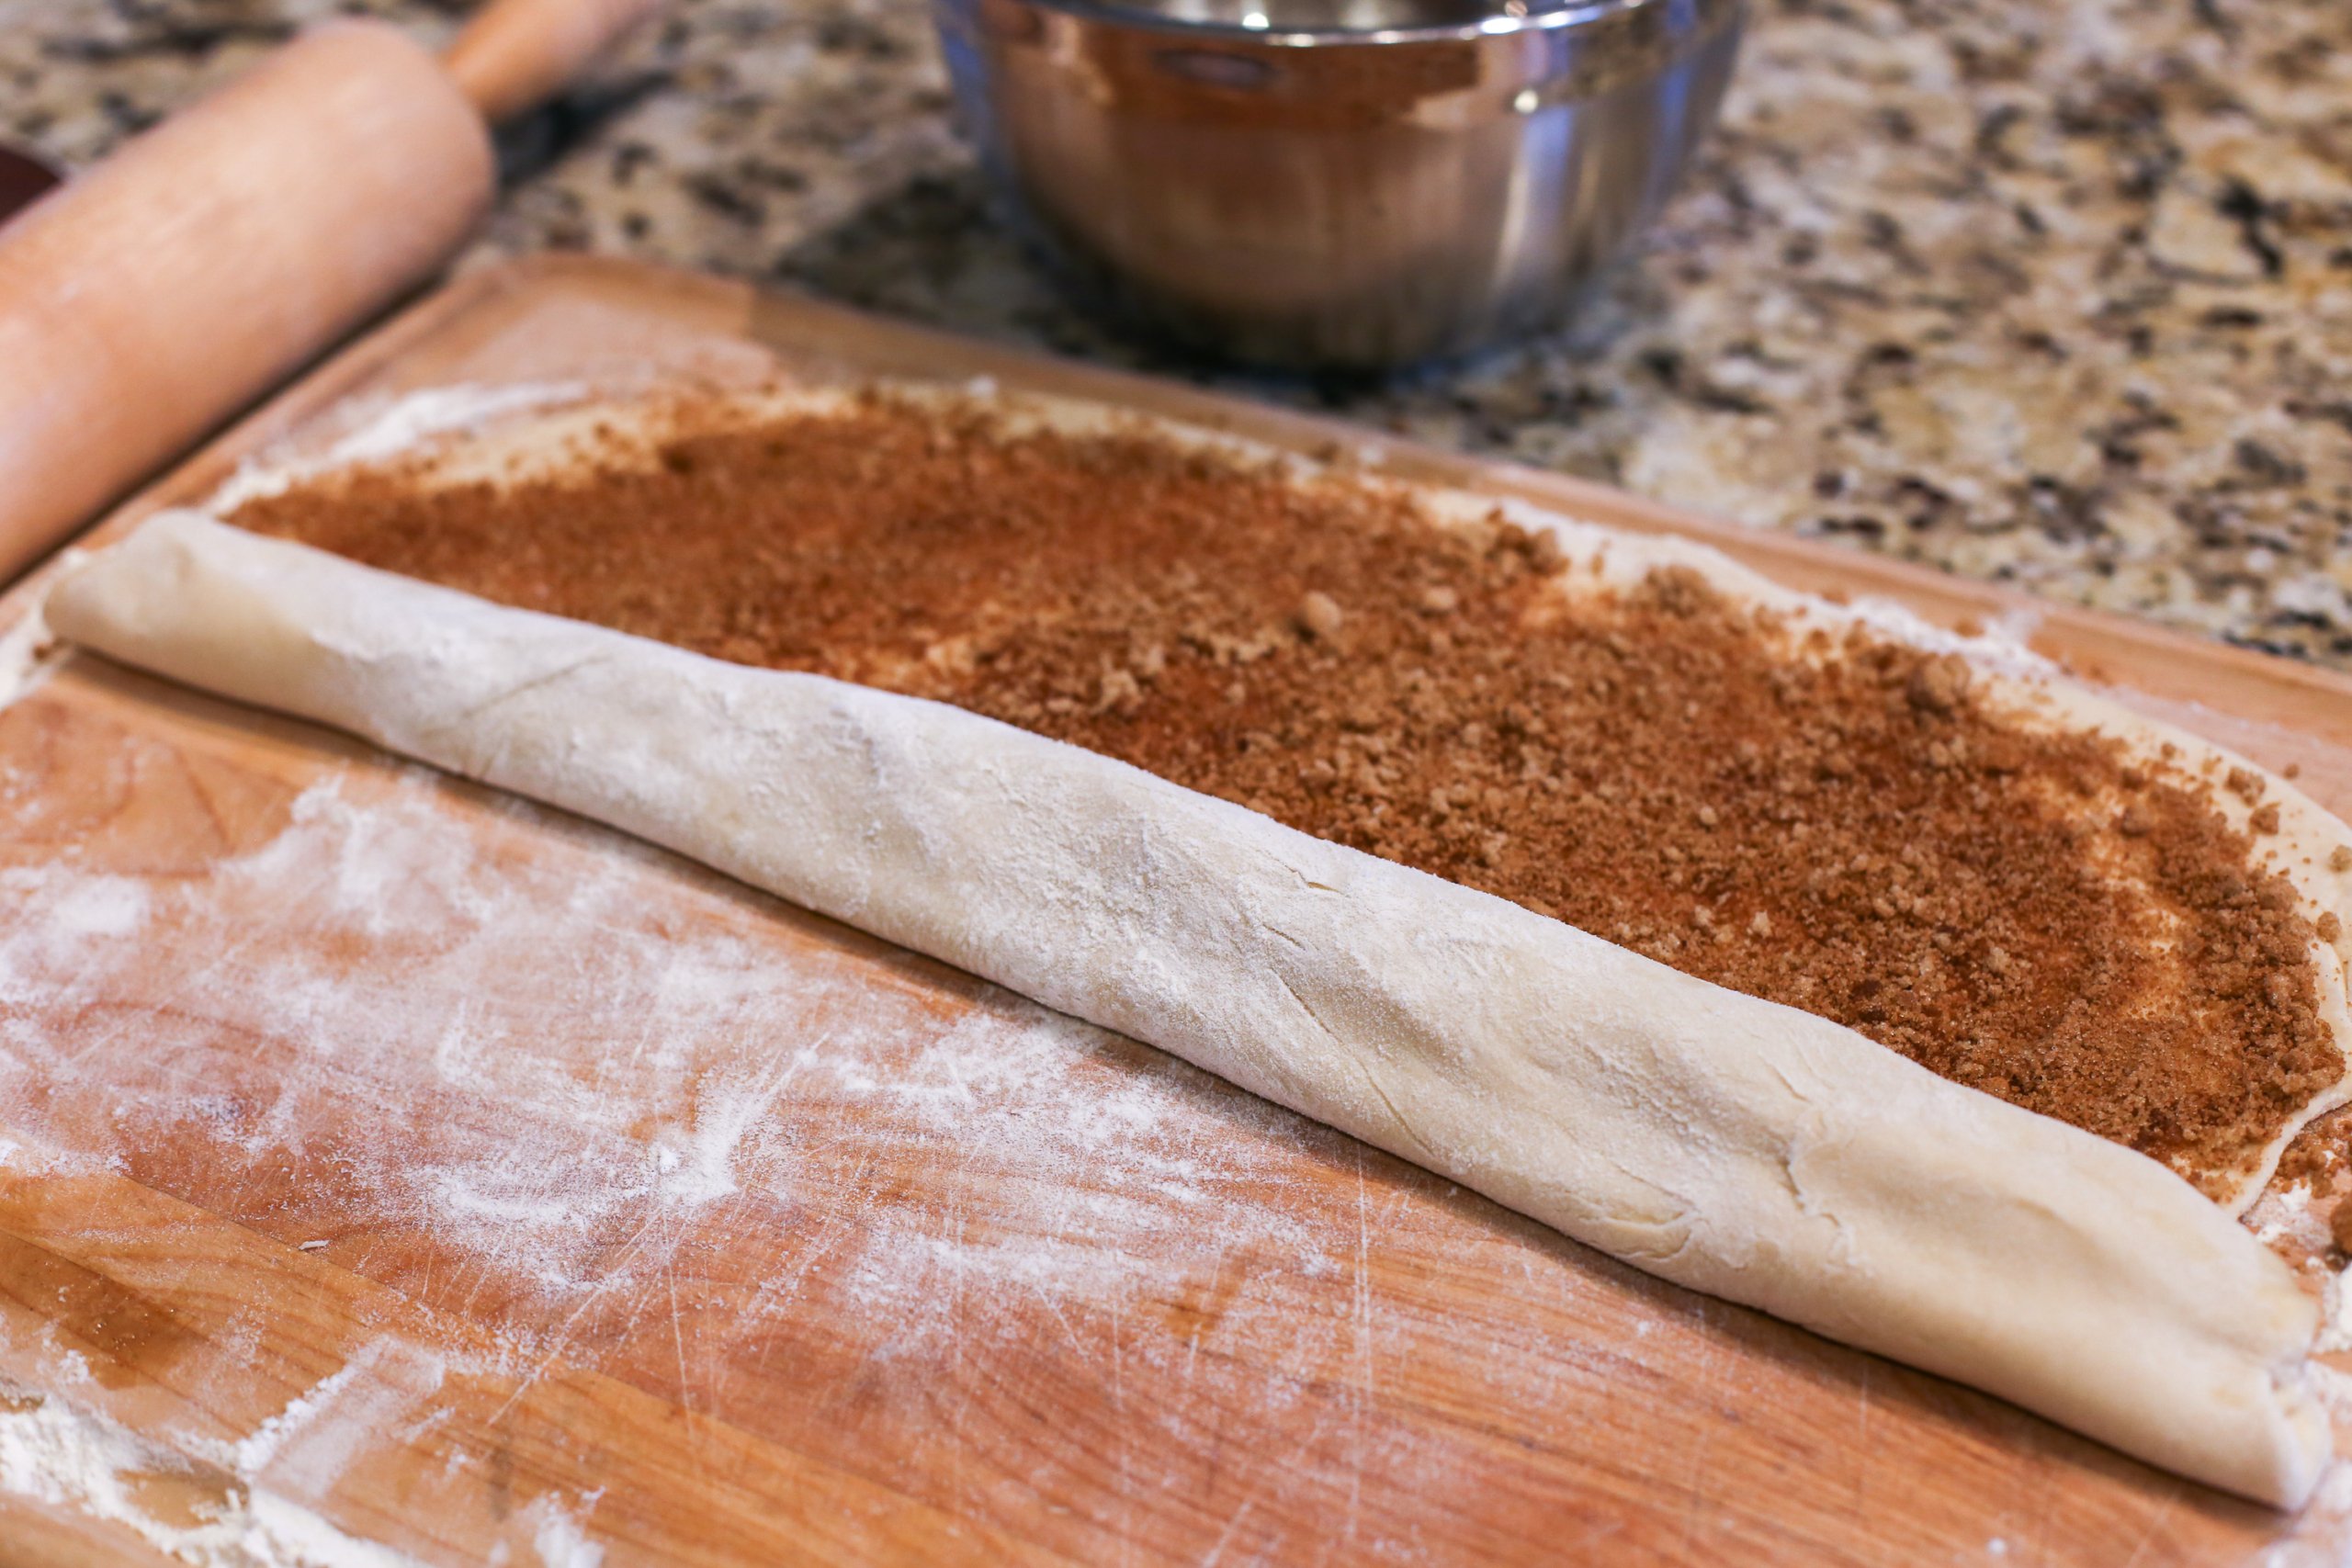 Cinnamon roll dough with a cinnamon-sugar mixture on top being rolled up before slicing.